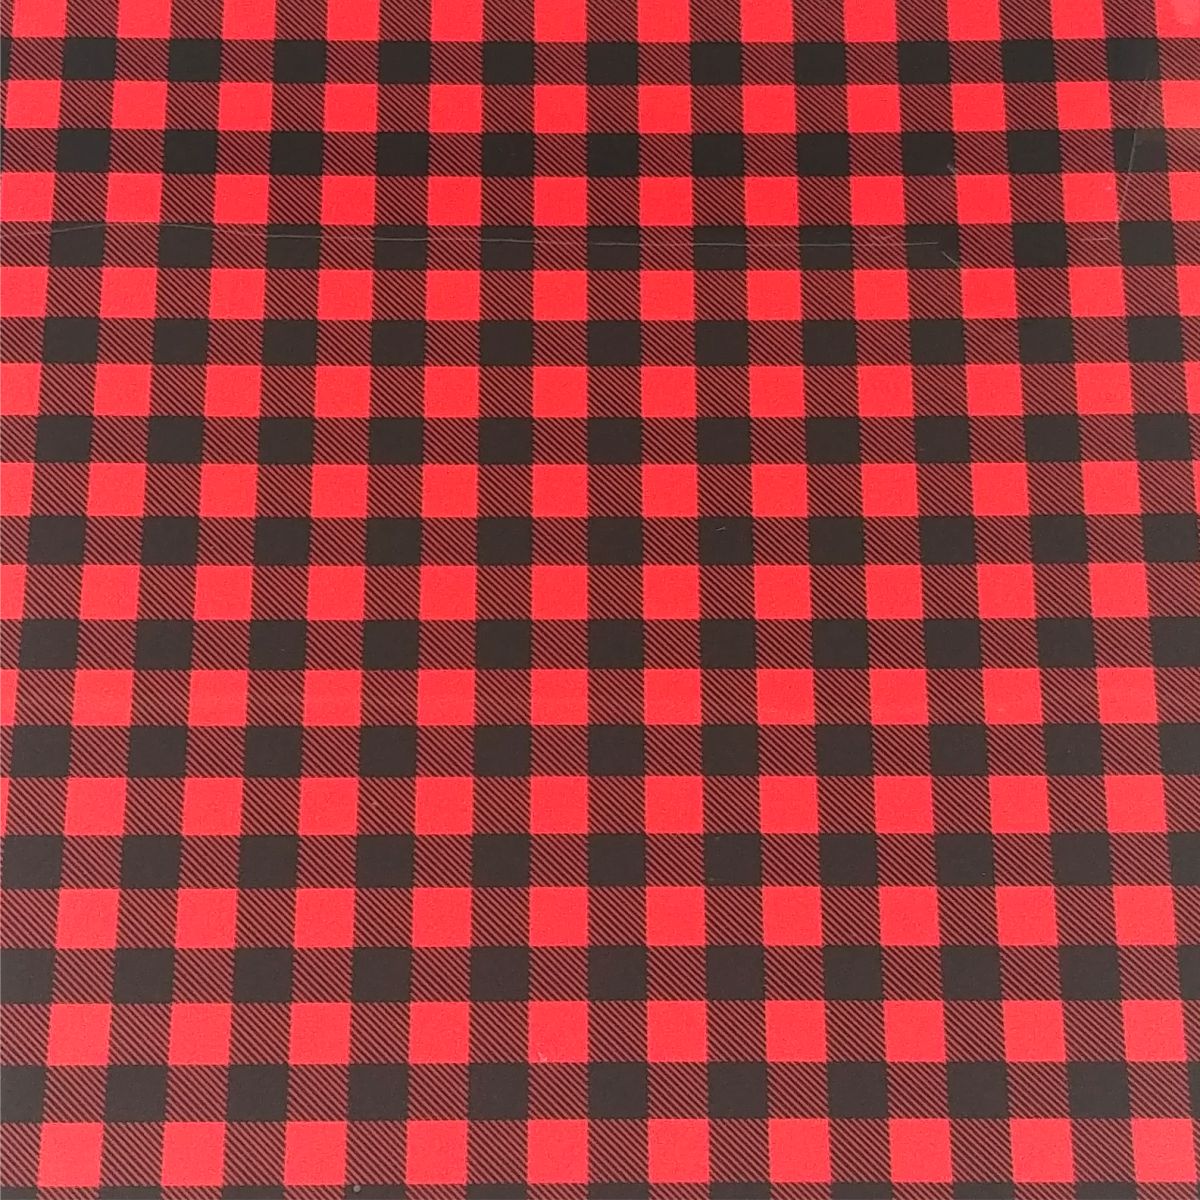 Specialty PSV Fashion Patterns-Buffalo Plaid Red 12in x 15in Sheet (Permanent Adhesive Pattern Vinyl) CLEARANCE